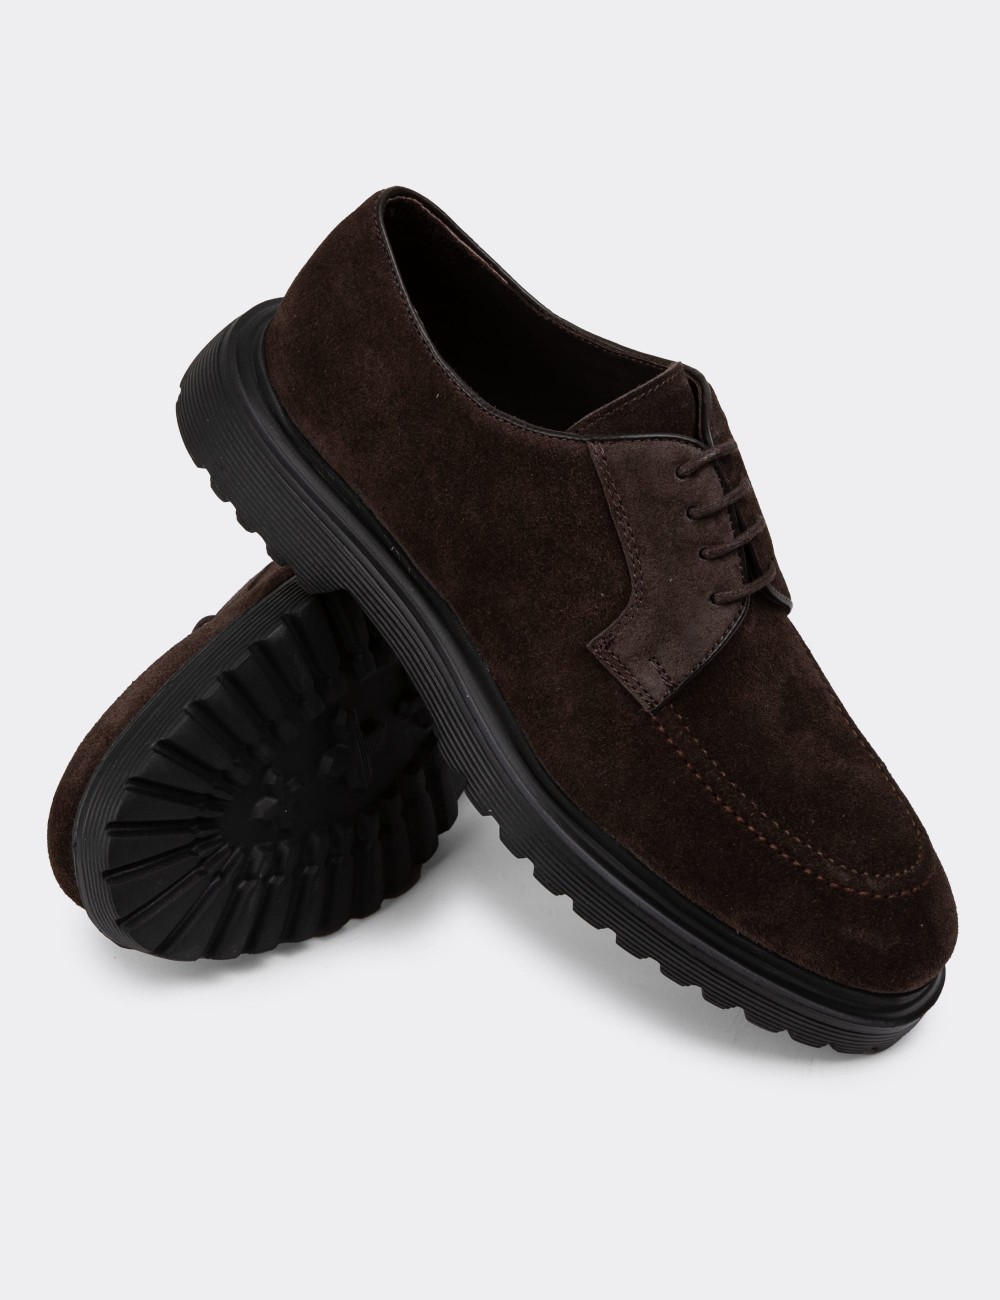 Brown Suede Leather Lace-up Shoes - 01931MKHVE03